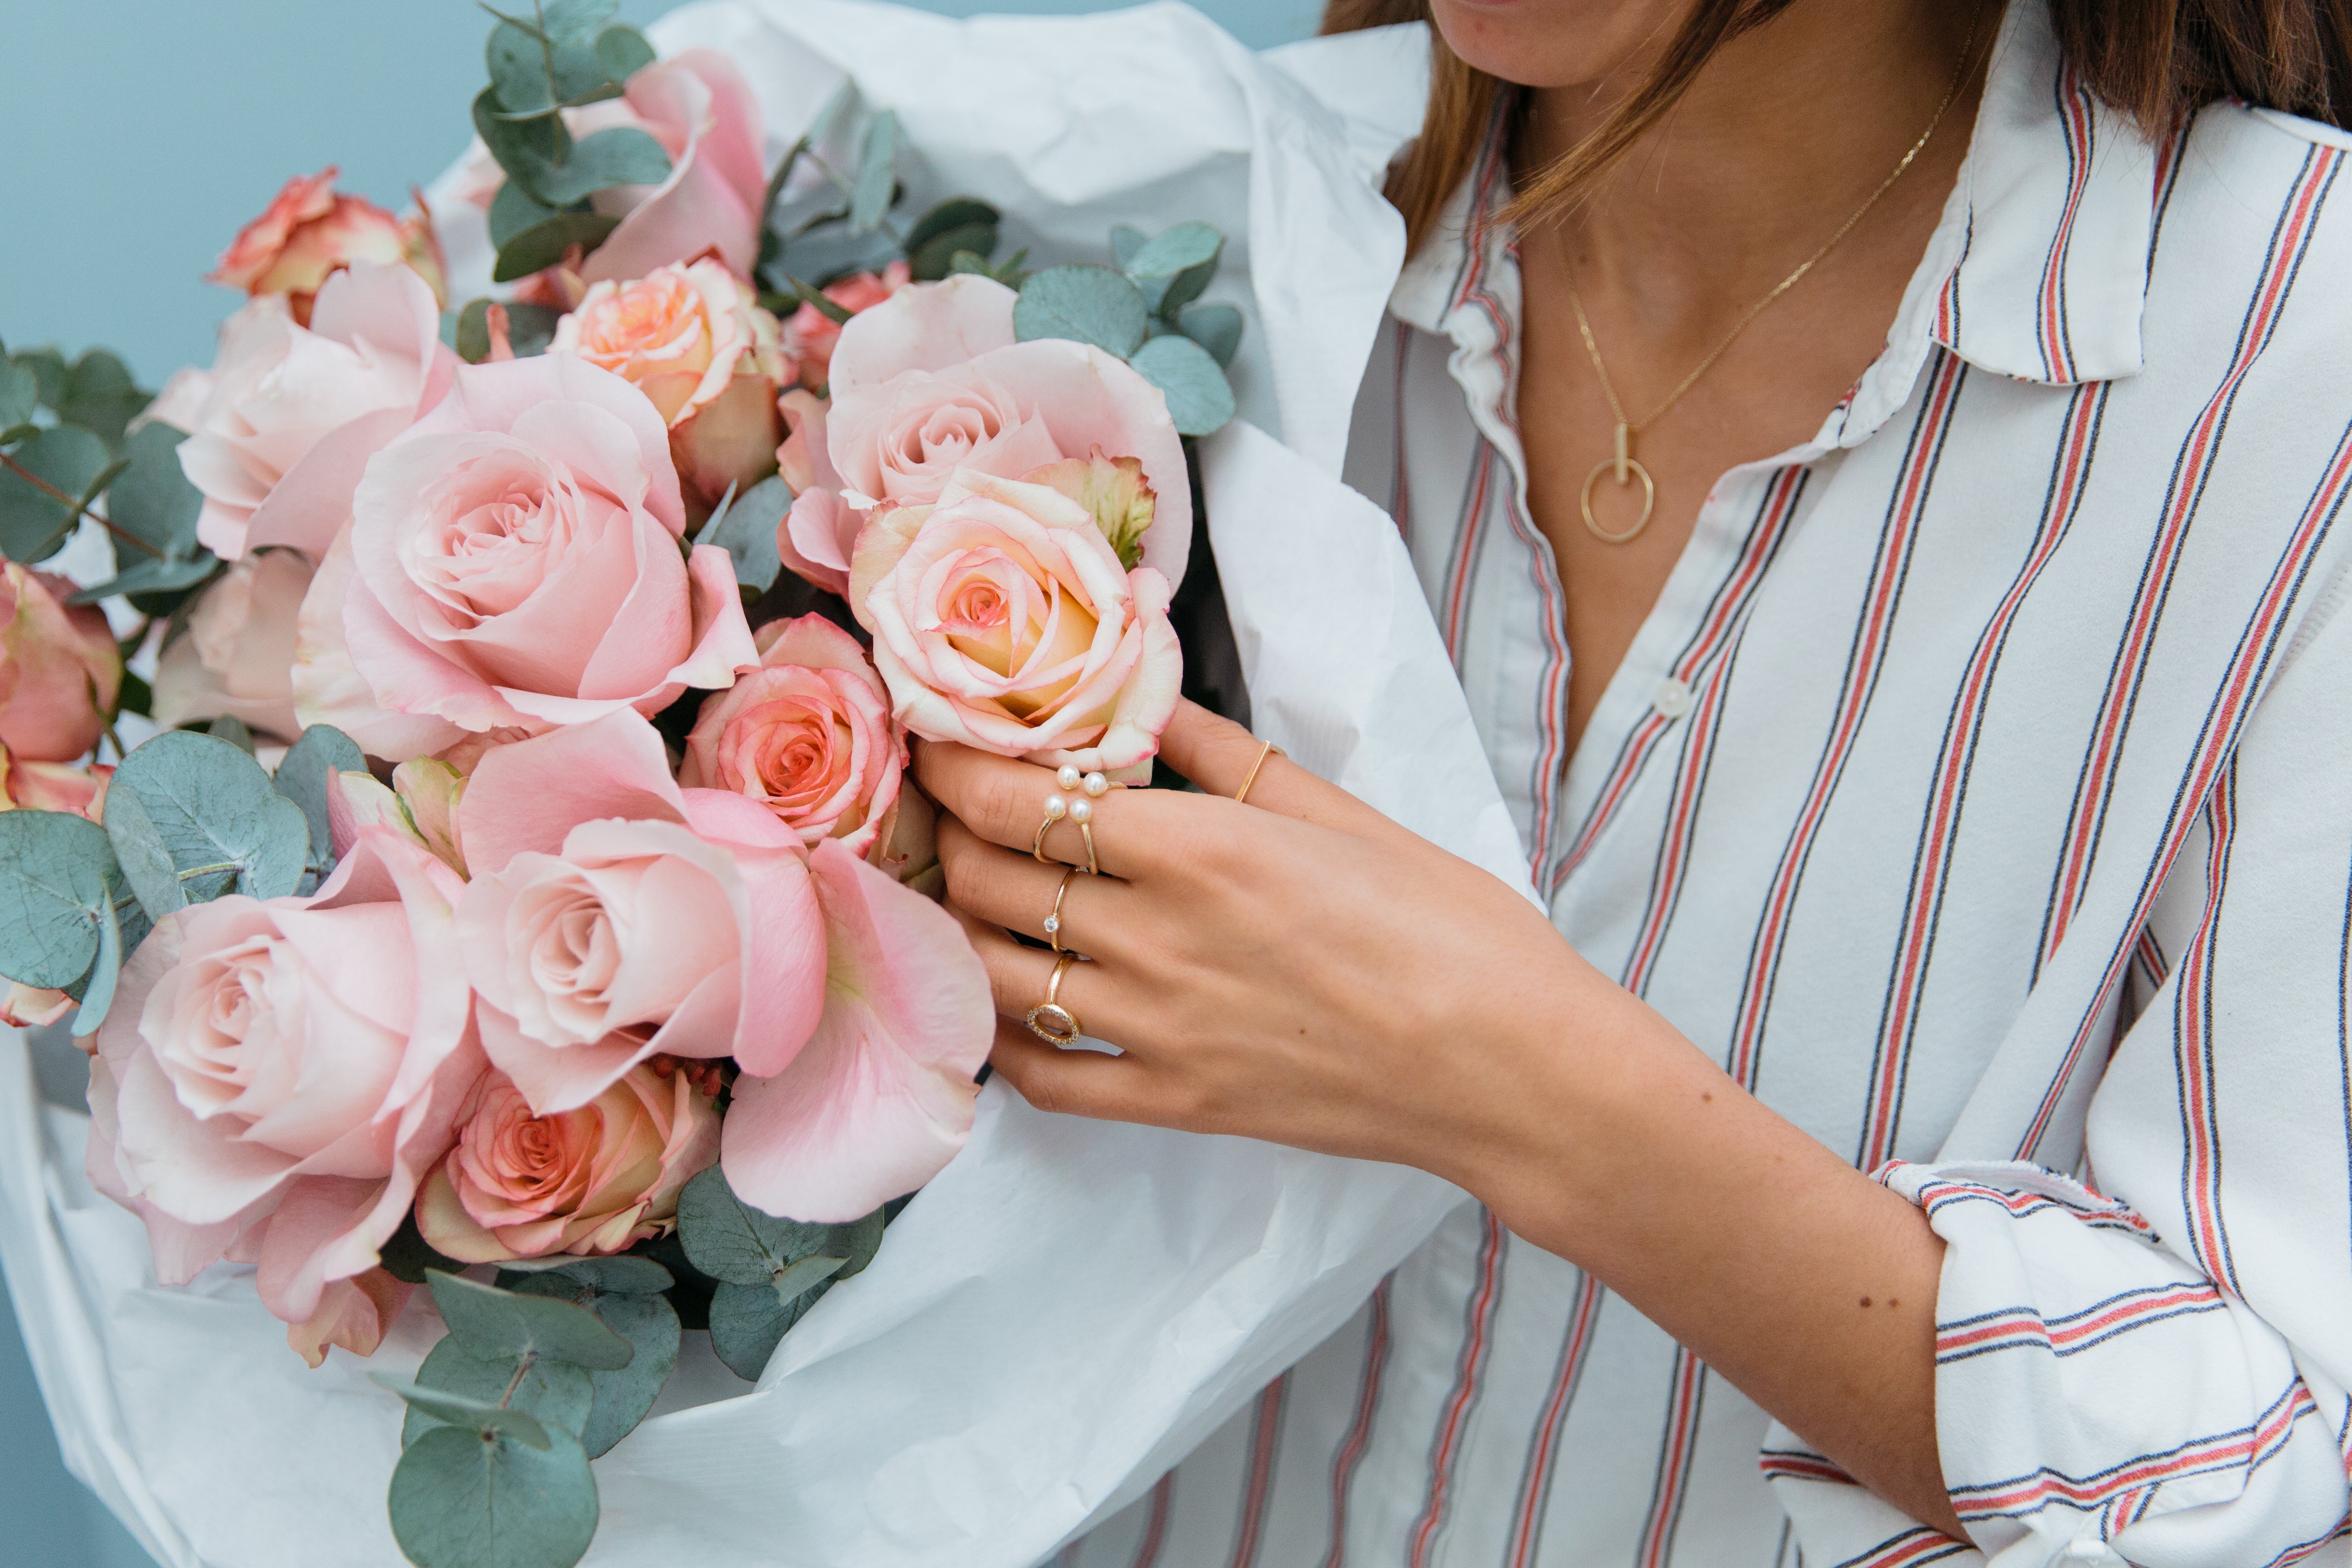 AUrate New York designed a special Ode a la Rose bouquet for Mother's Day 